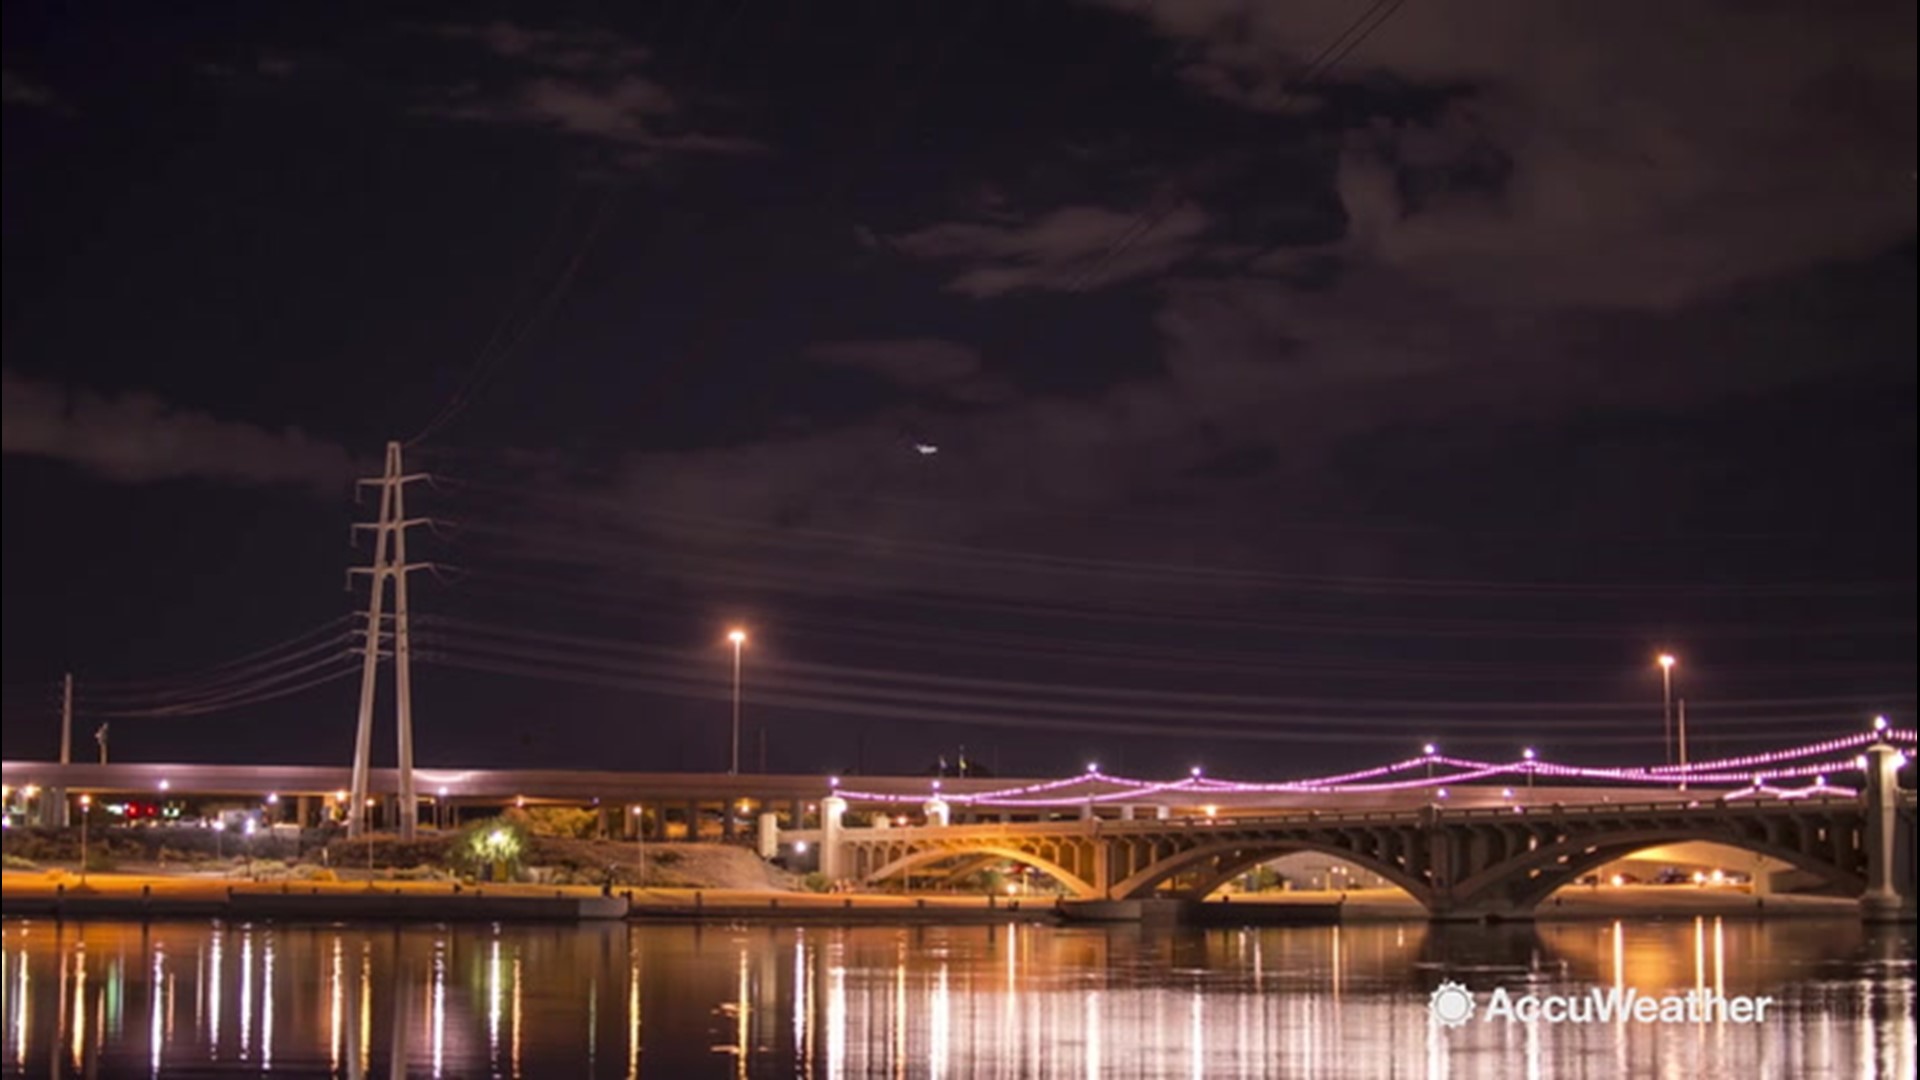 It was a peaceful evening in Tempe, Arizona, despite the potential for severe weather triggering flash flood warnings across Arizona on Sept. 22.